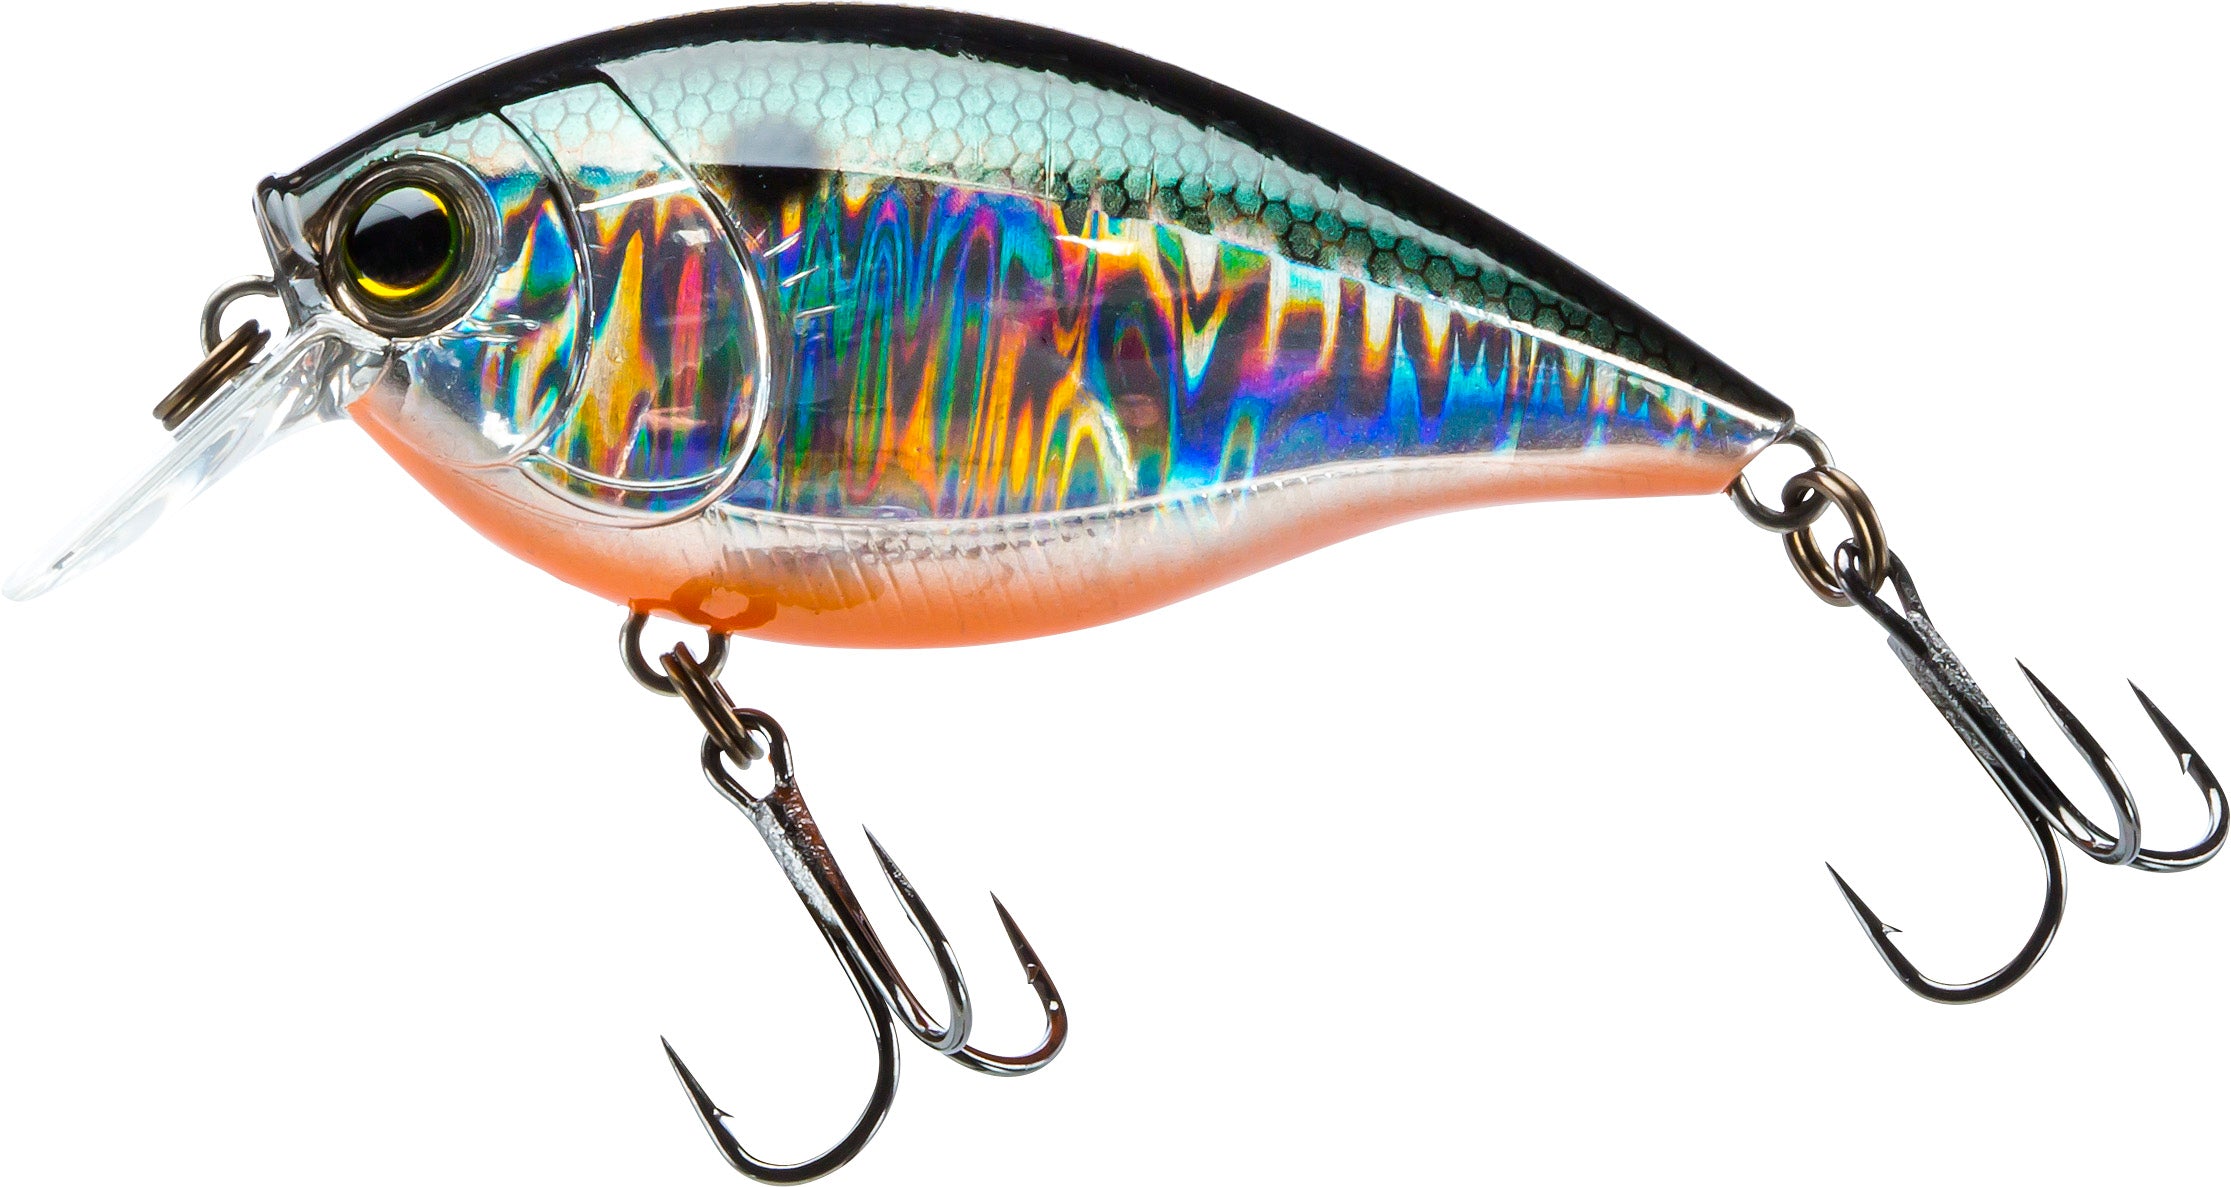 Evergreen X-Over Shad Bluegill Chart Belly